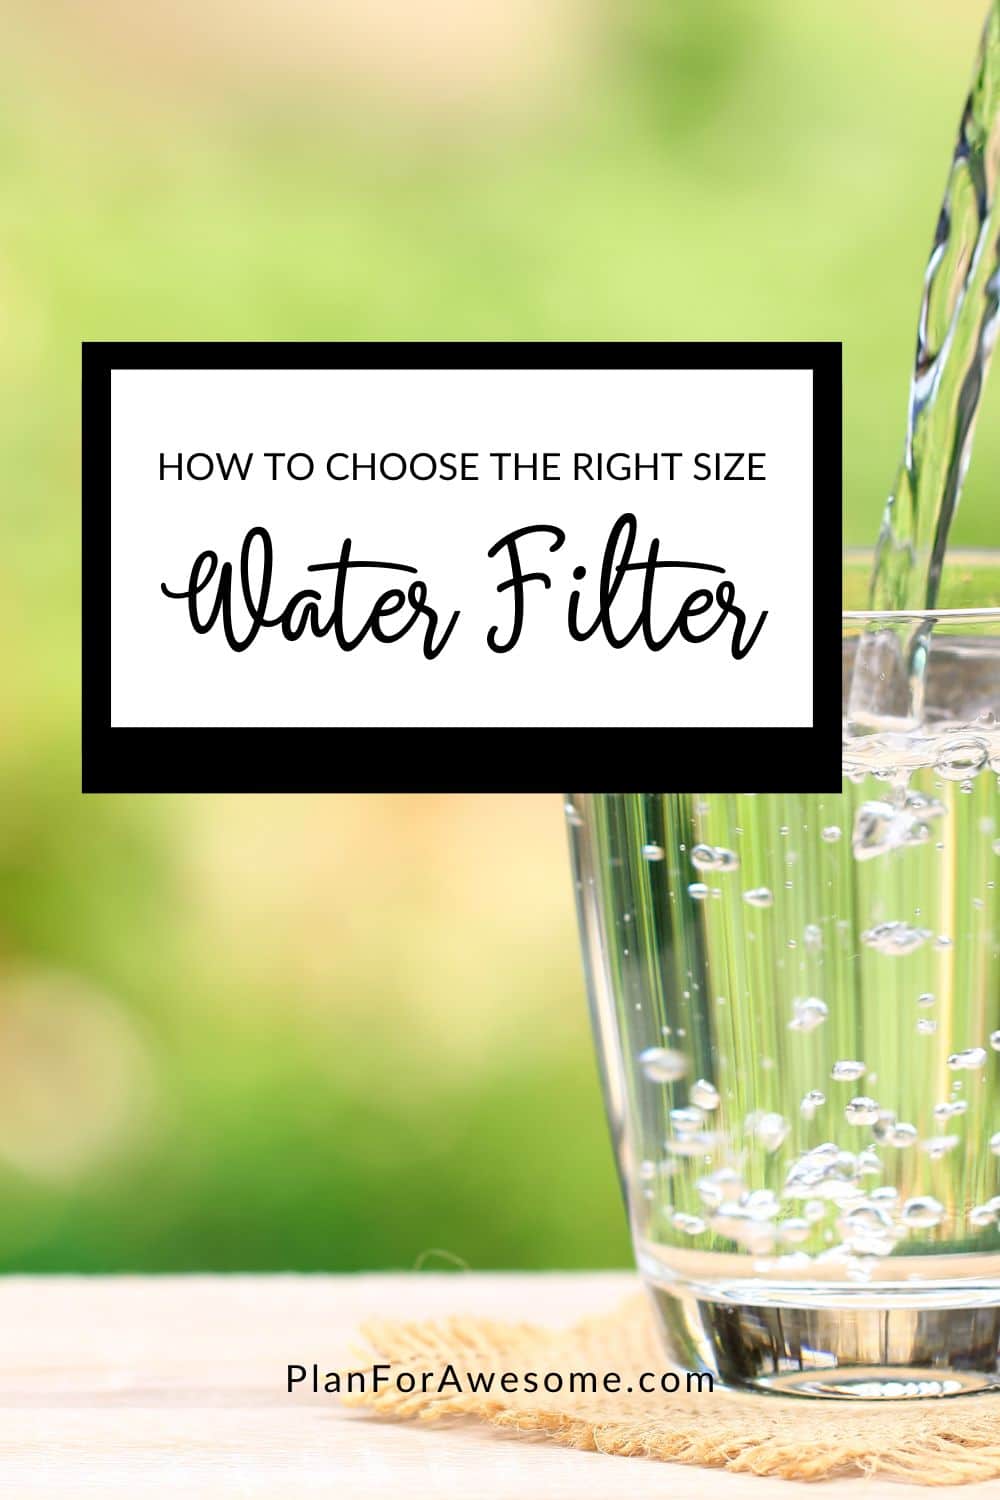 How to Decide the best size of berkey water filter